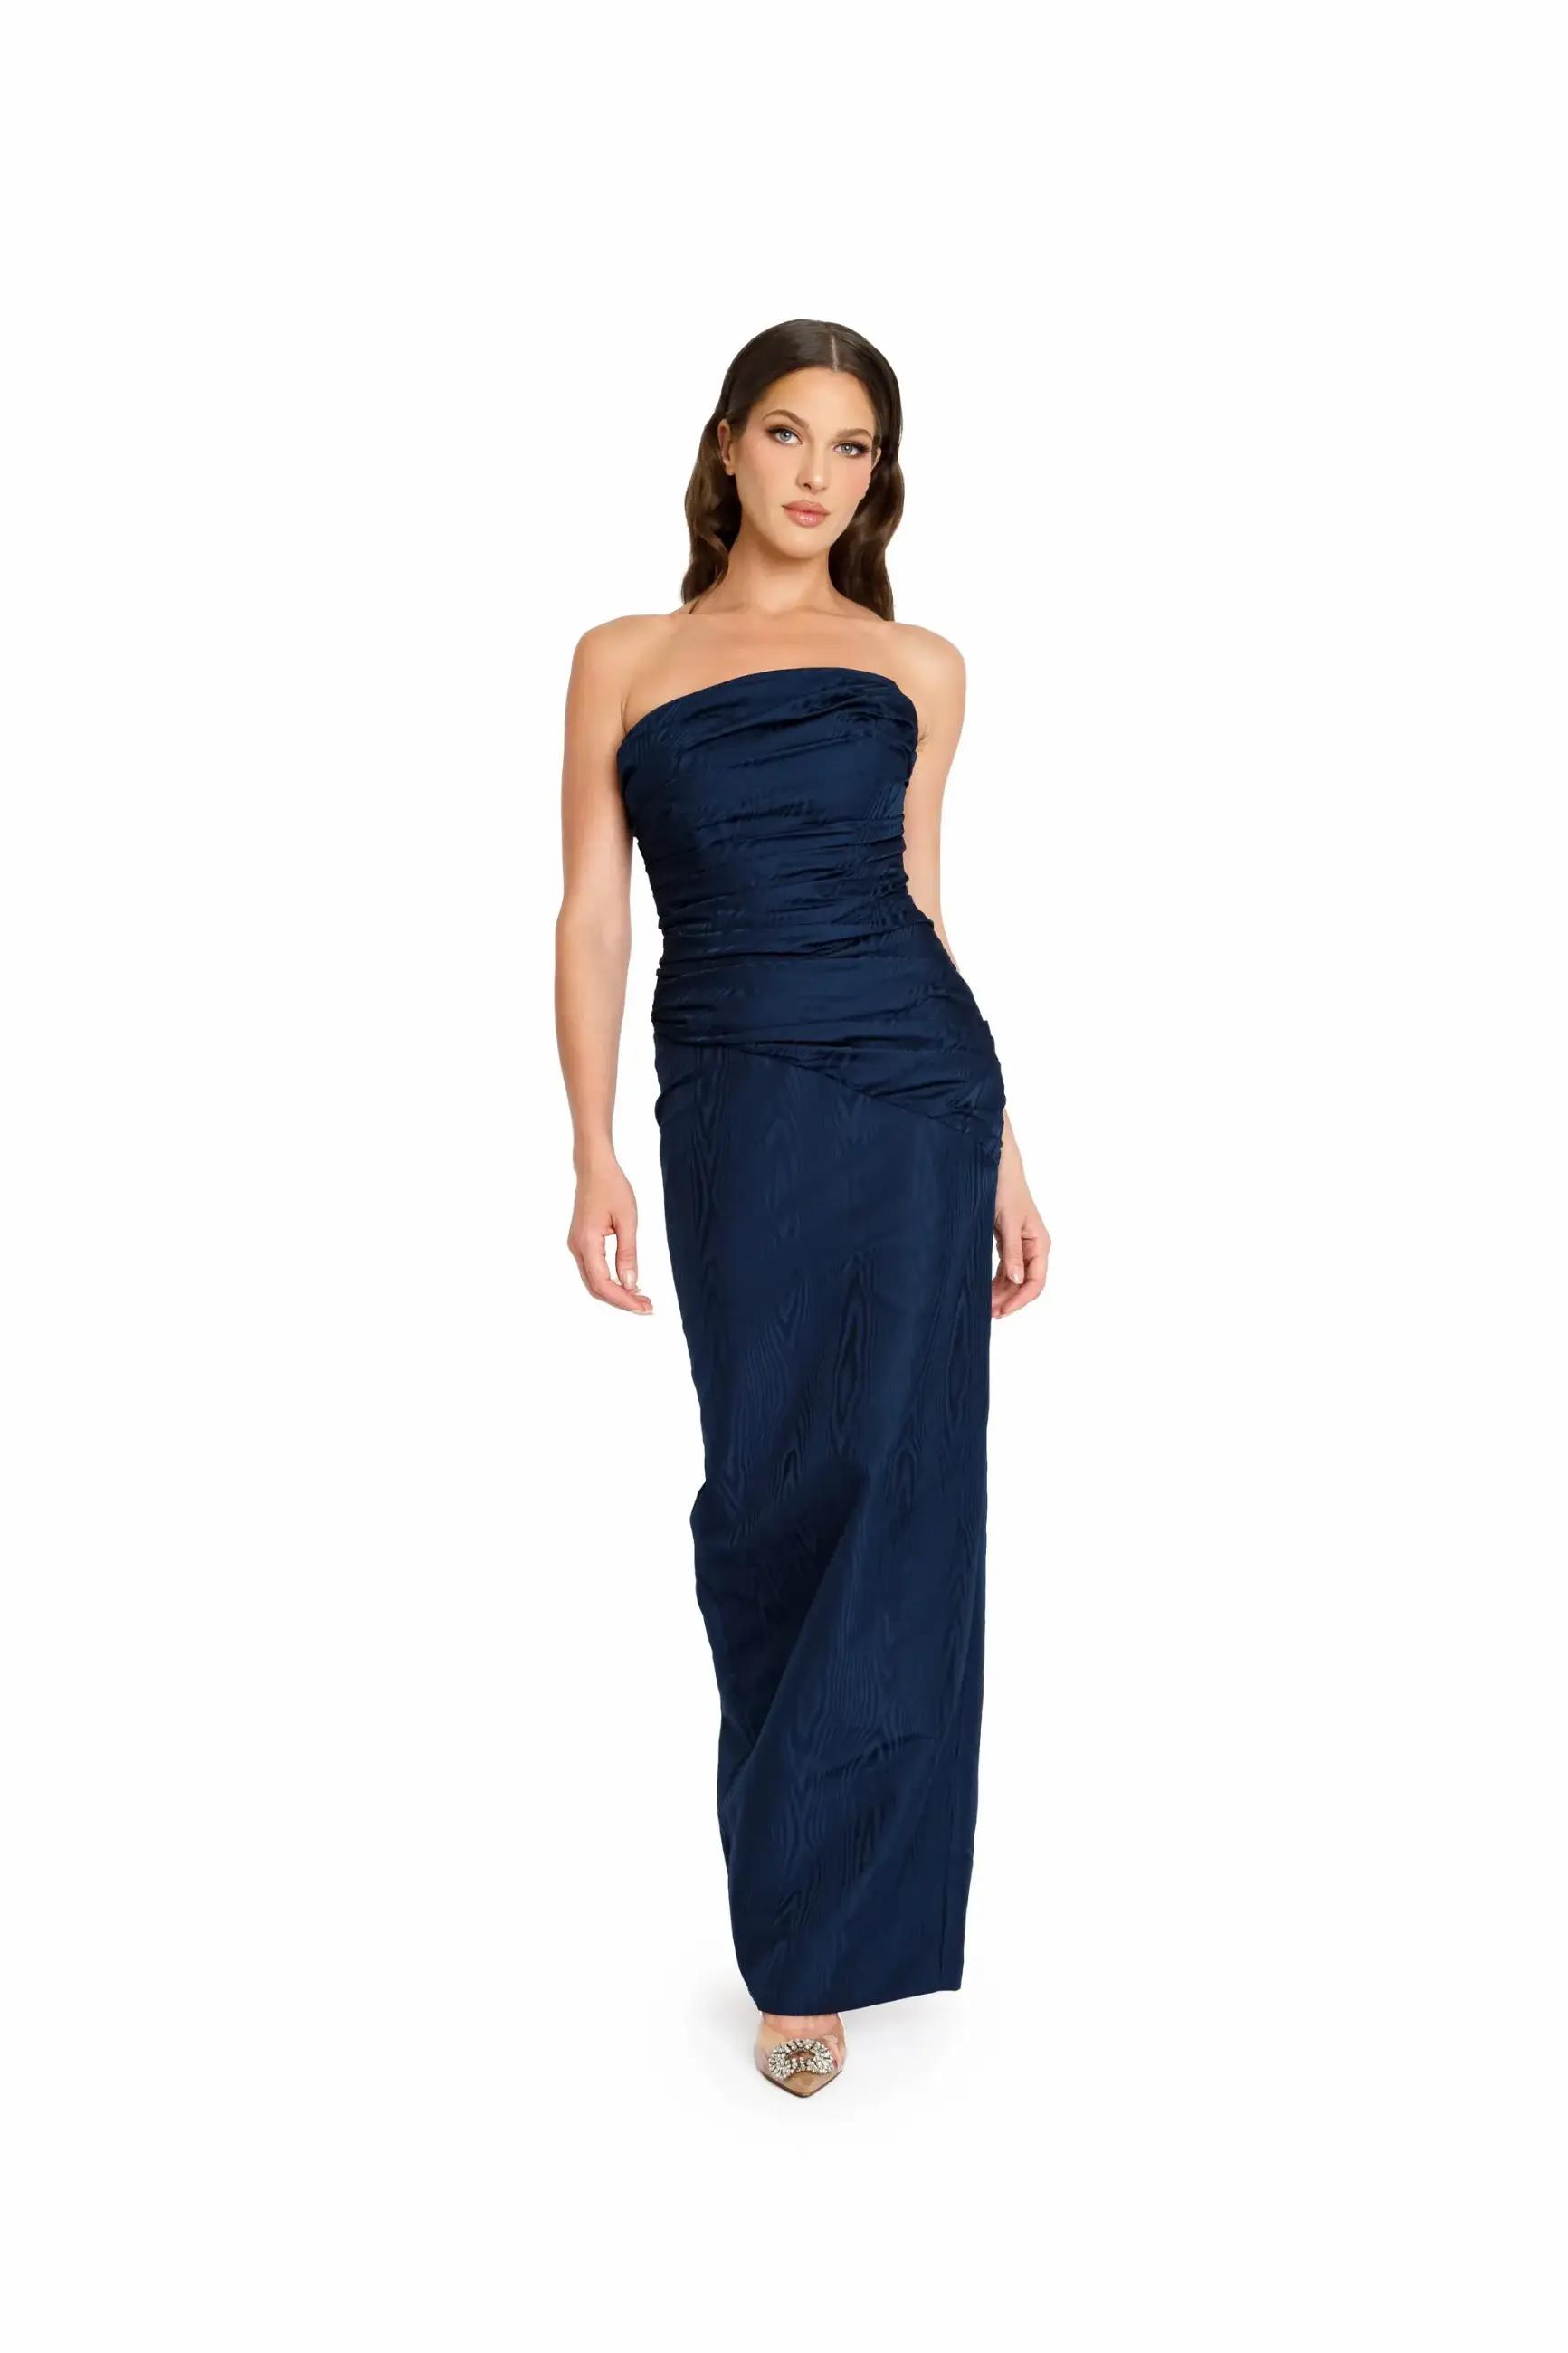 Model wearing a long navy evening gown